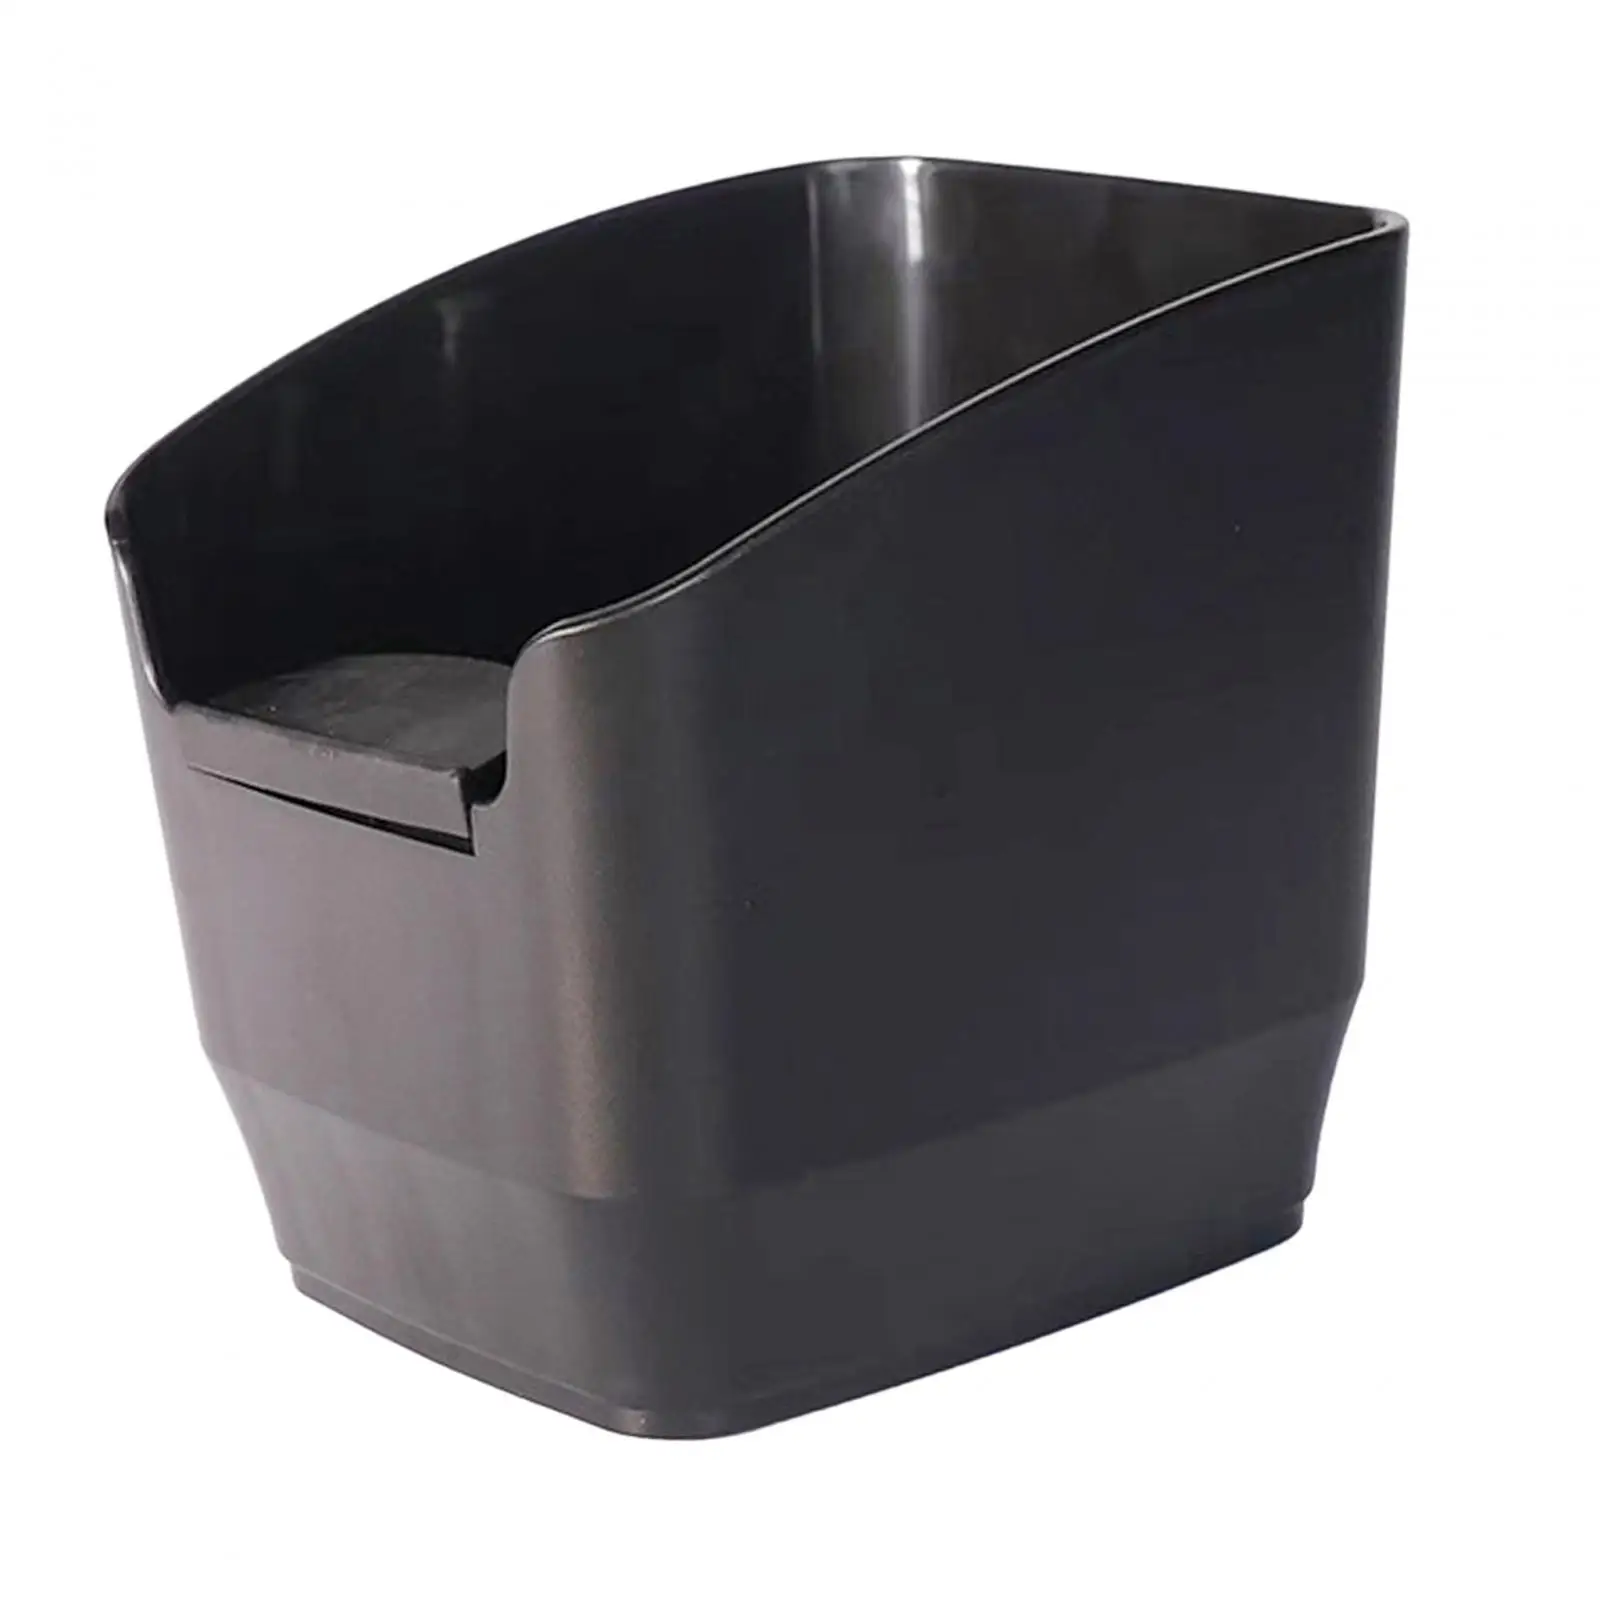 Grounds Container Durable Shock Absorbent with Removable Knock Bar Non Slip Coffee Ground Knock Box for Kitchen Bar Hotel Office